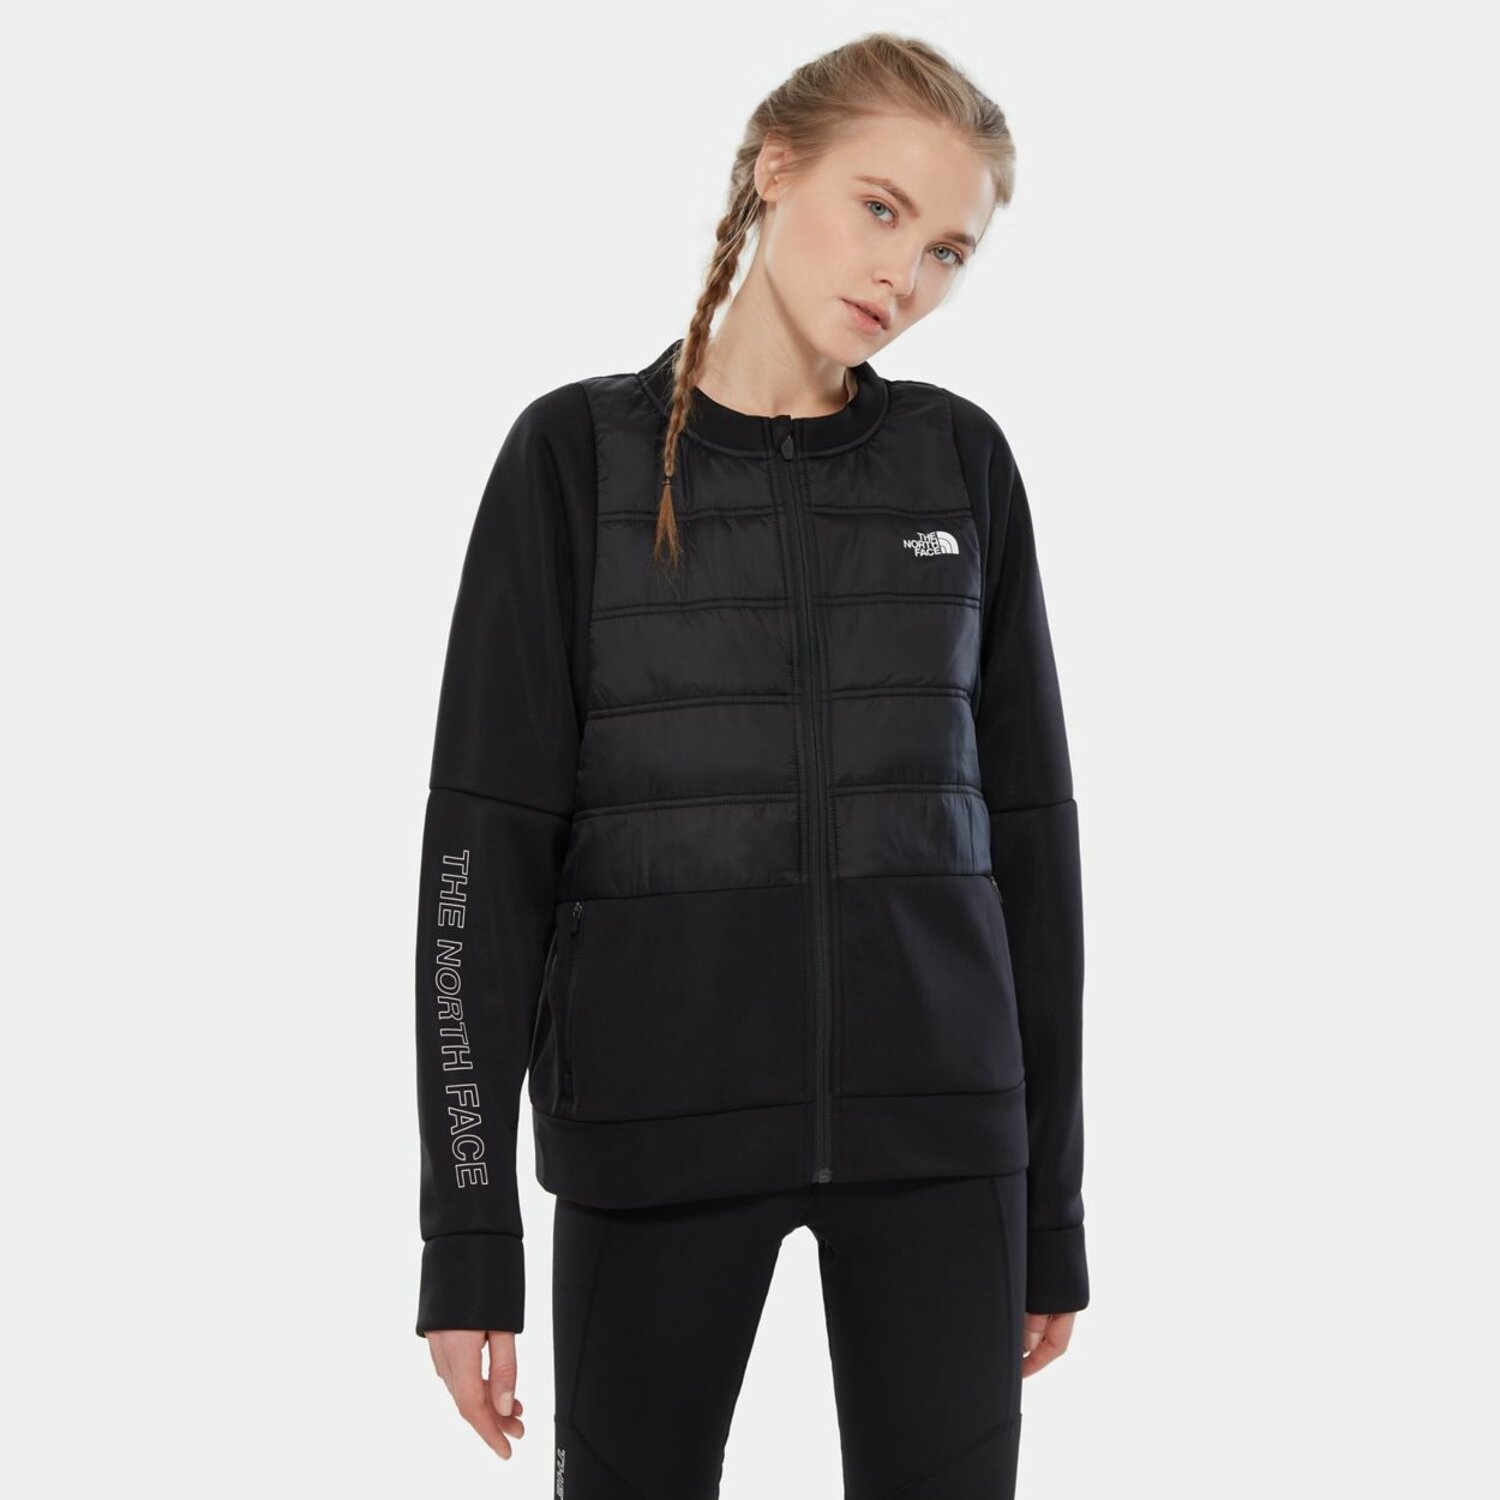 THE NORTH FACE NF0A3X3Y WOMEN INFINITY TRAIN INSULATED MONT SIZE M5